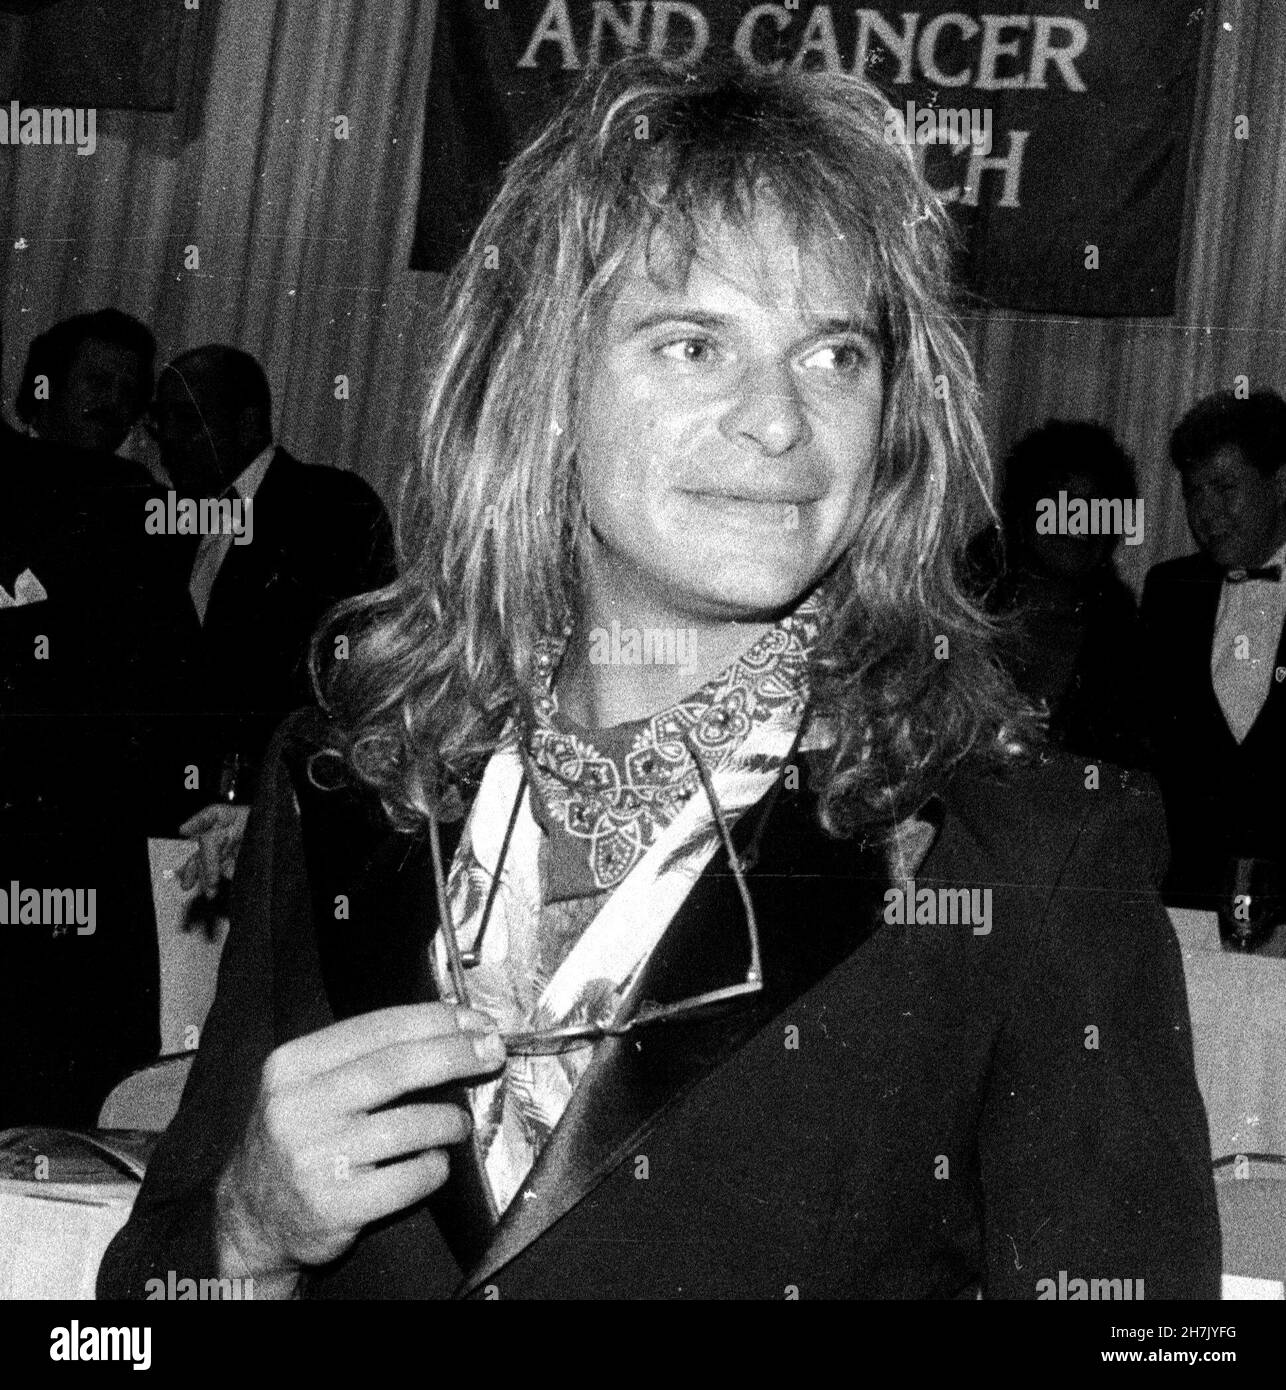 David lee roth Black and White Stock Photos & Images - Alamy